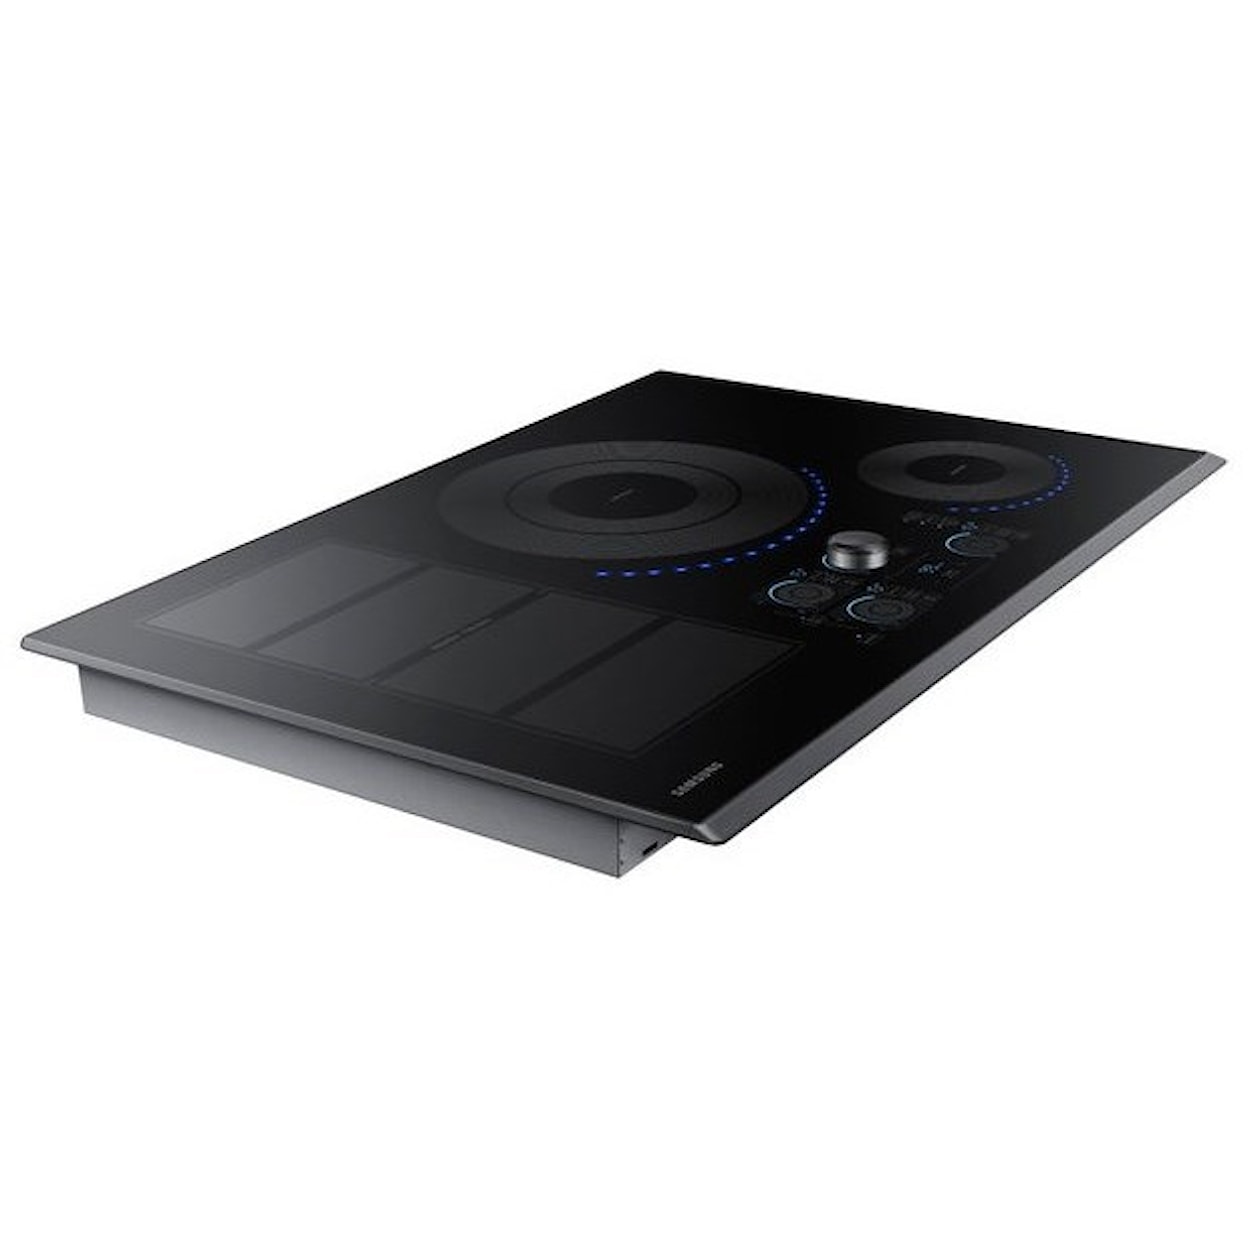 Samsung Appliances Electric Cooktops - Samsung 36" Induction Cooktop